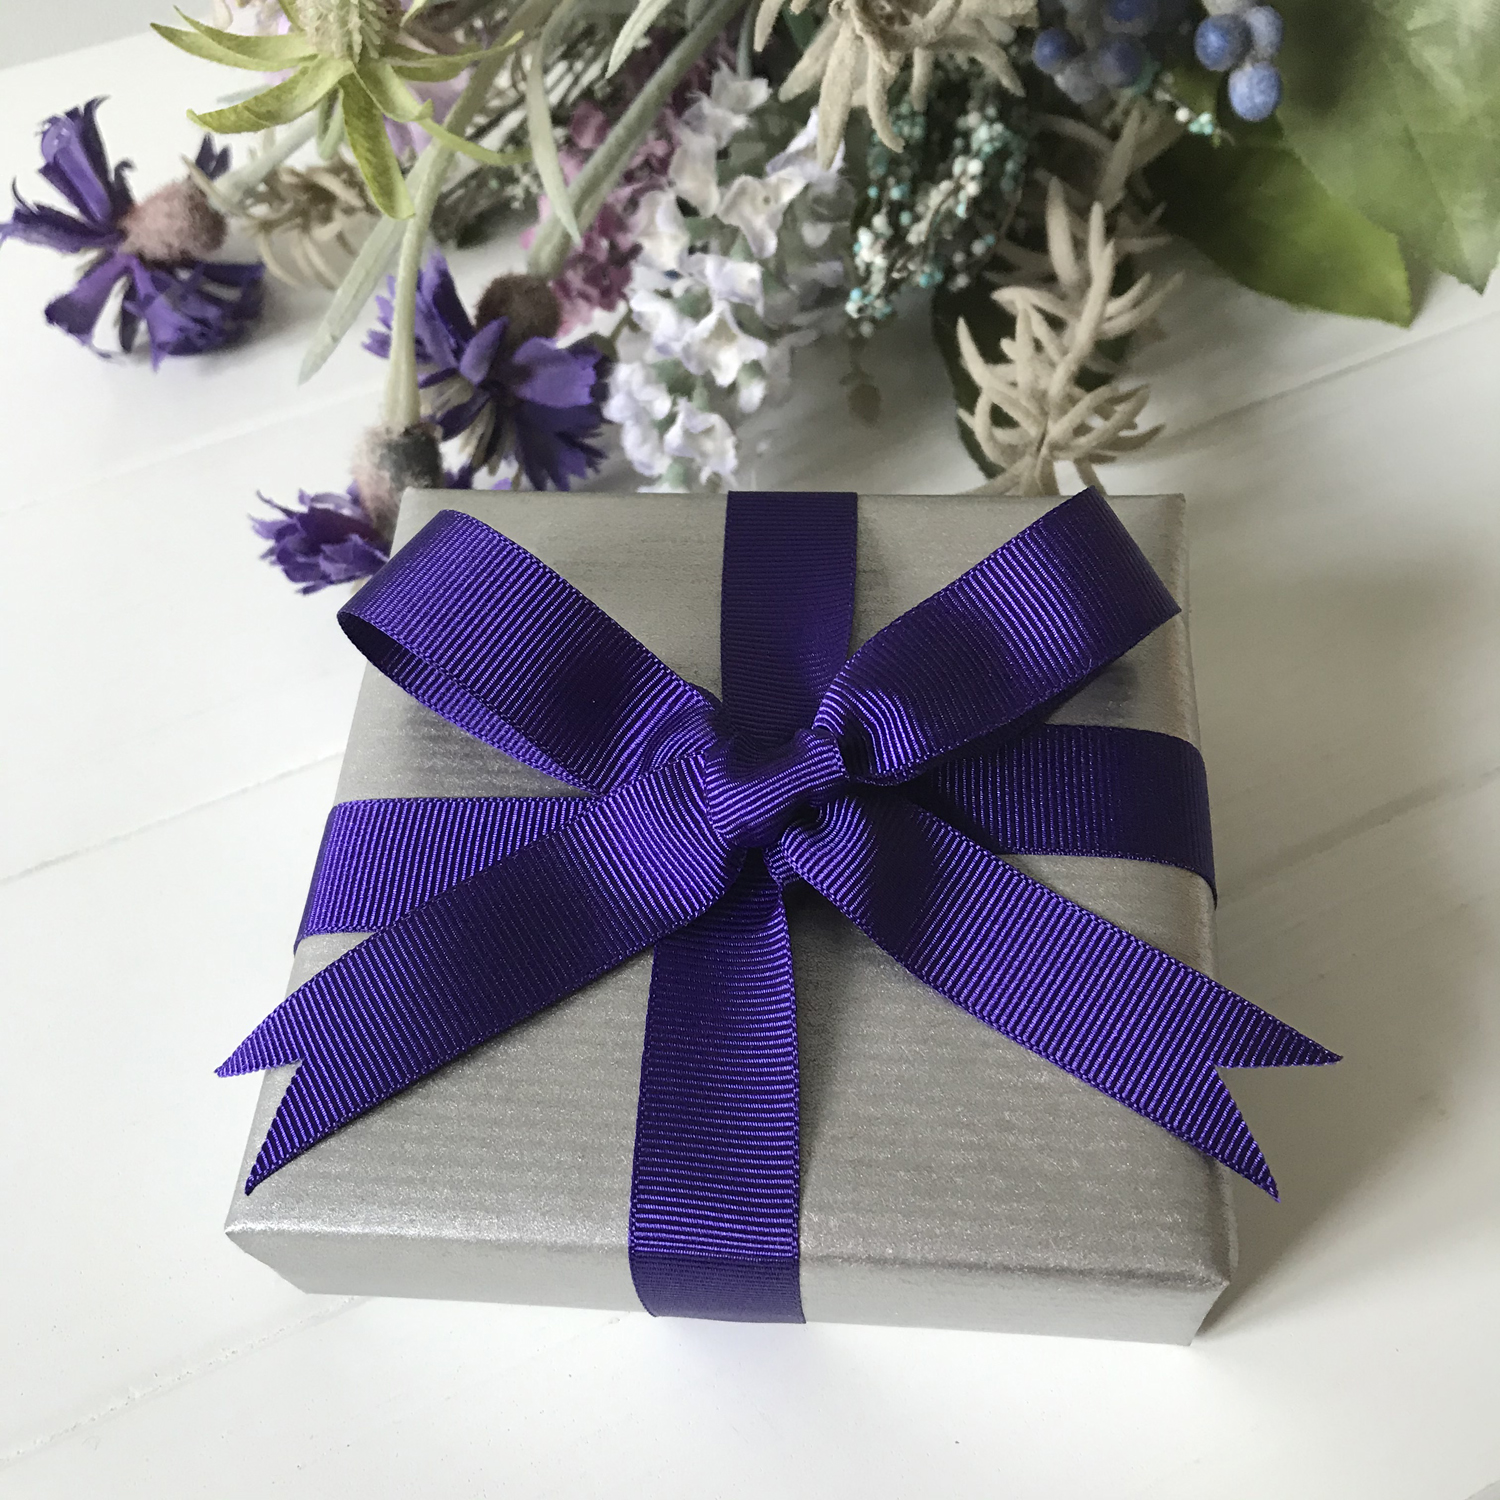 Biba & Rose offer gift-wrapping